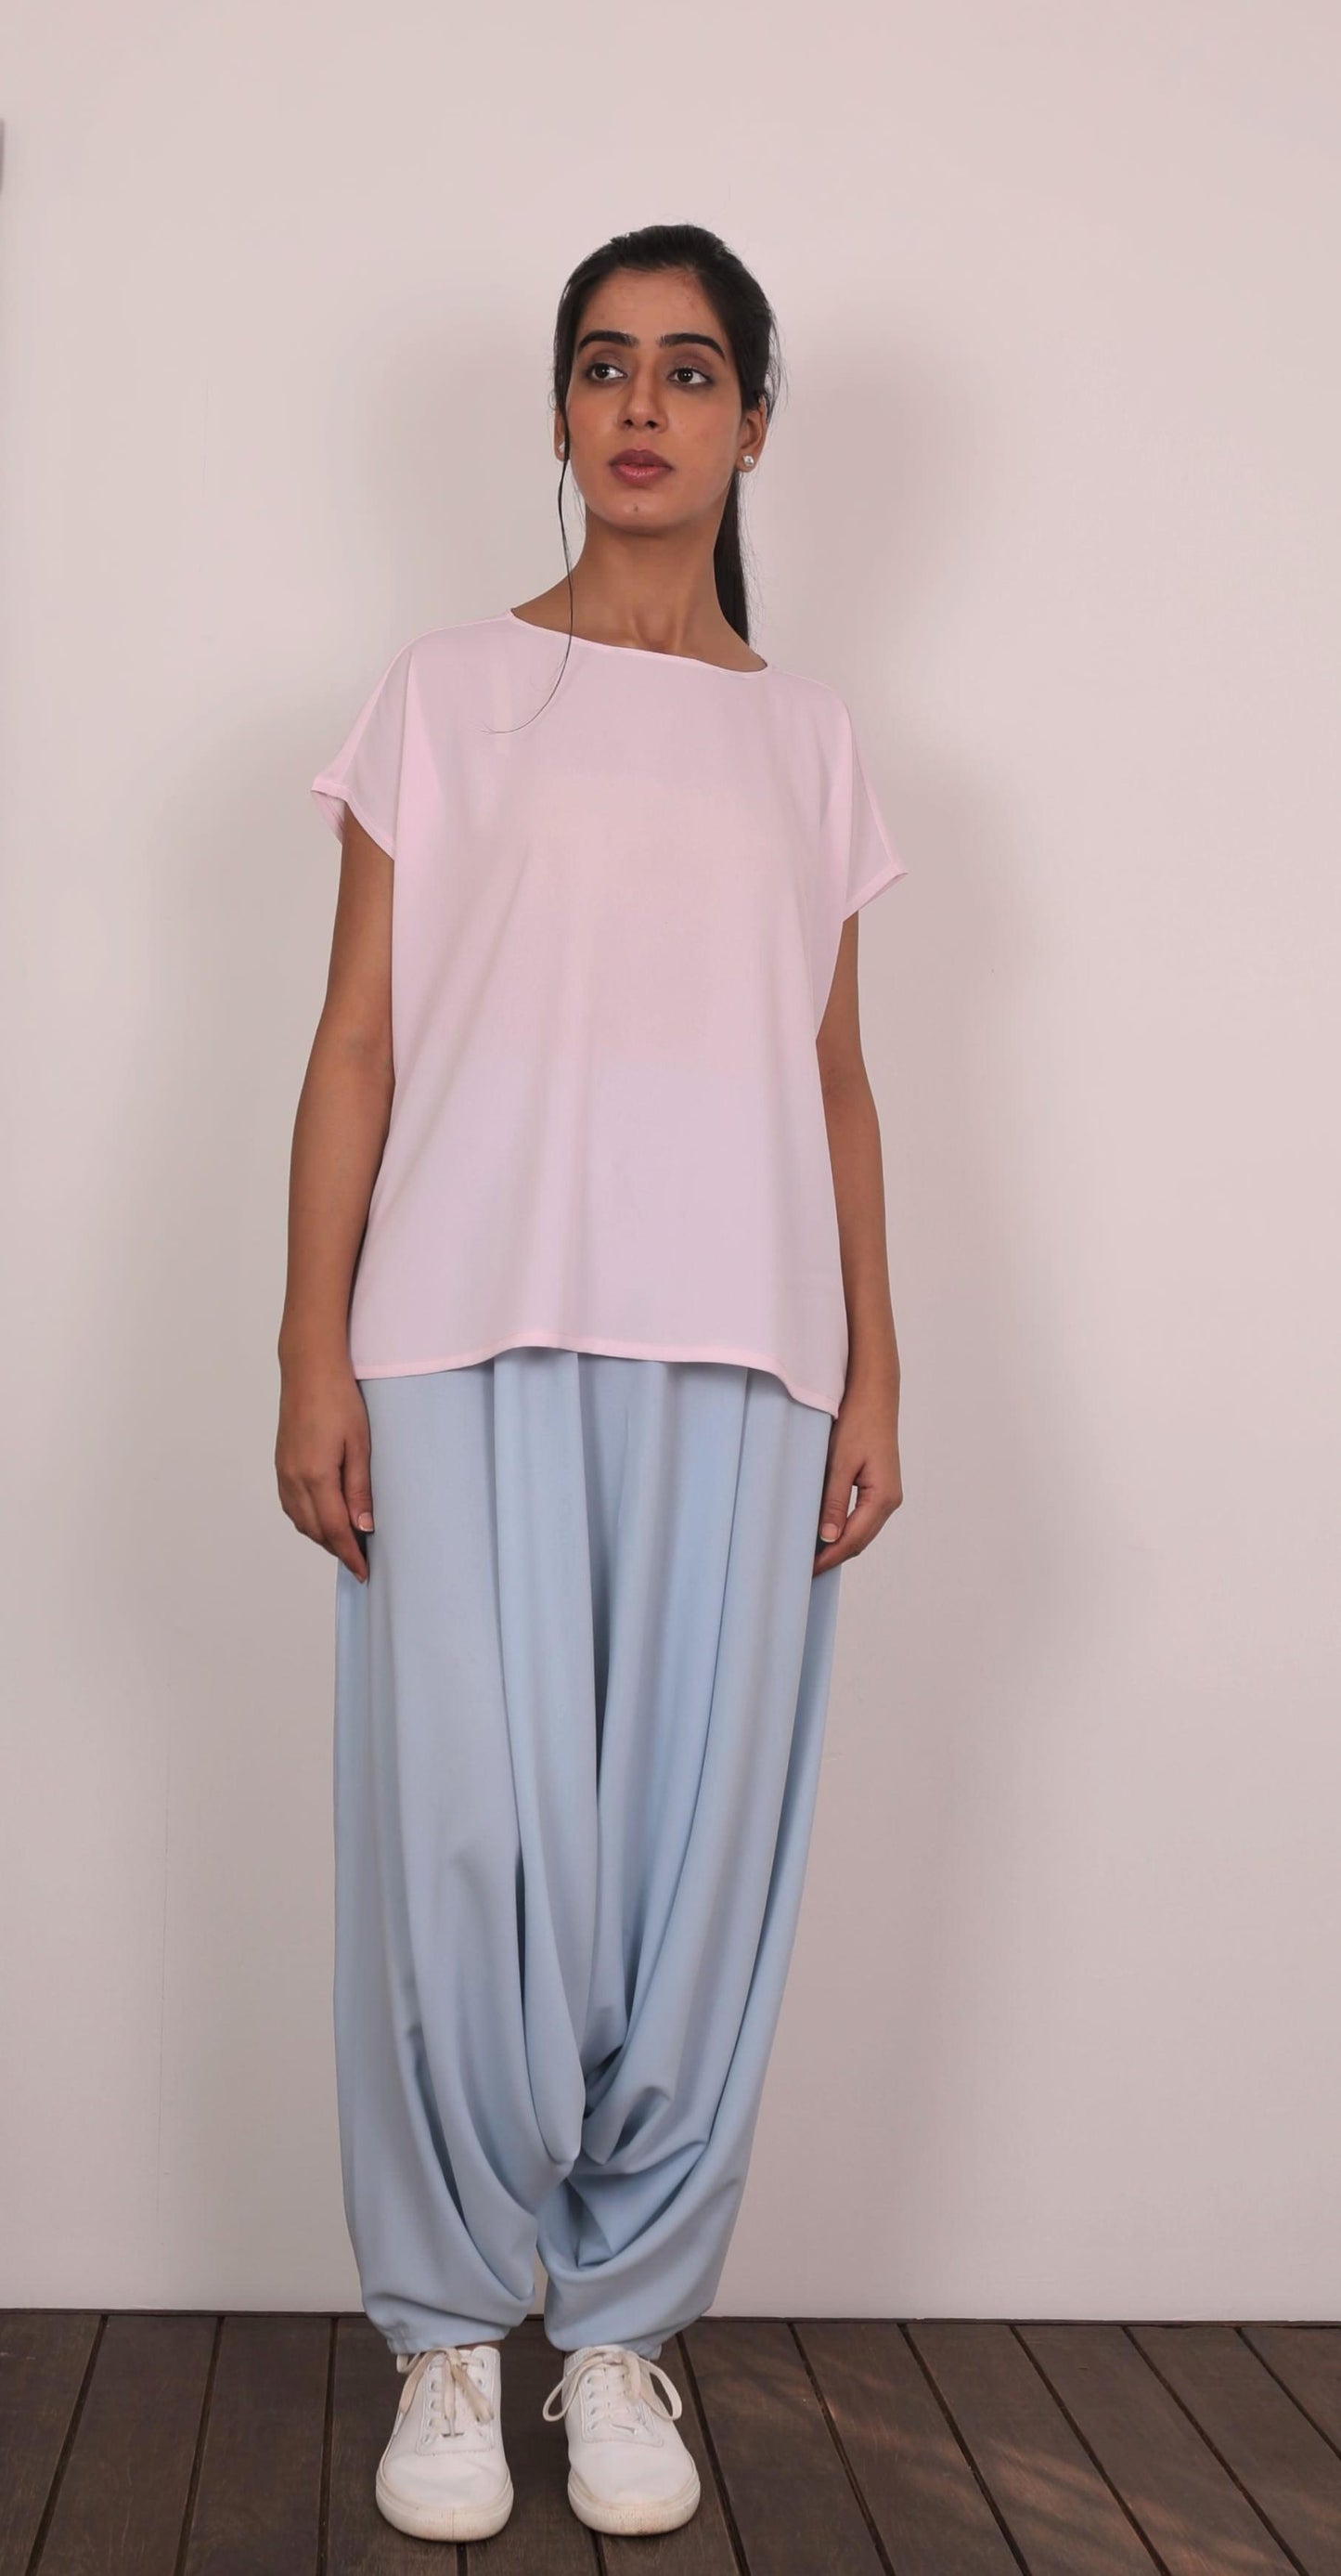 Square Cut Top With Dhoti Pants